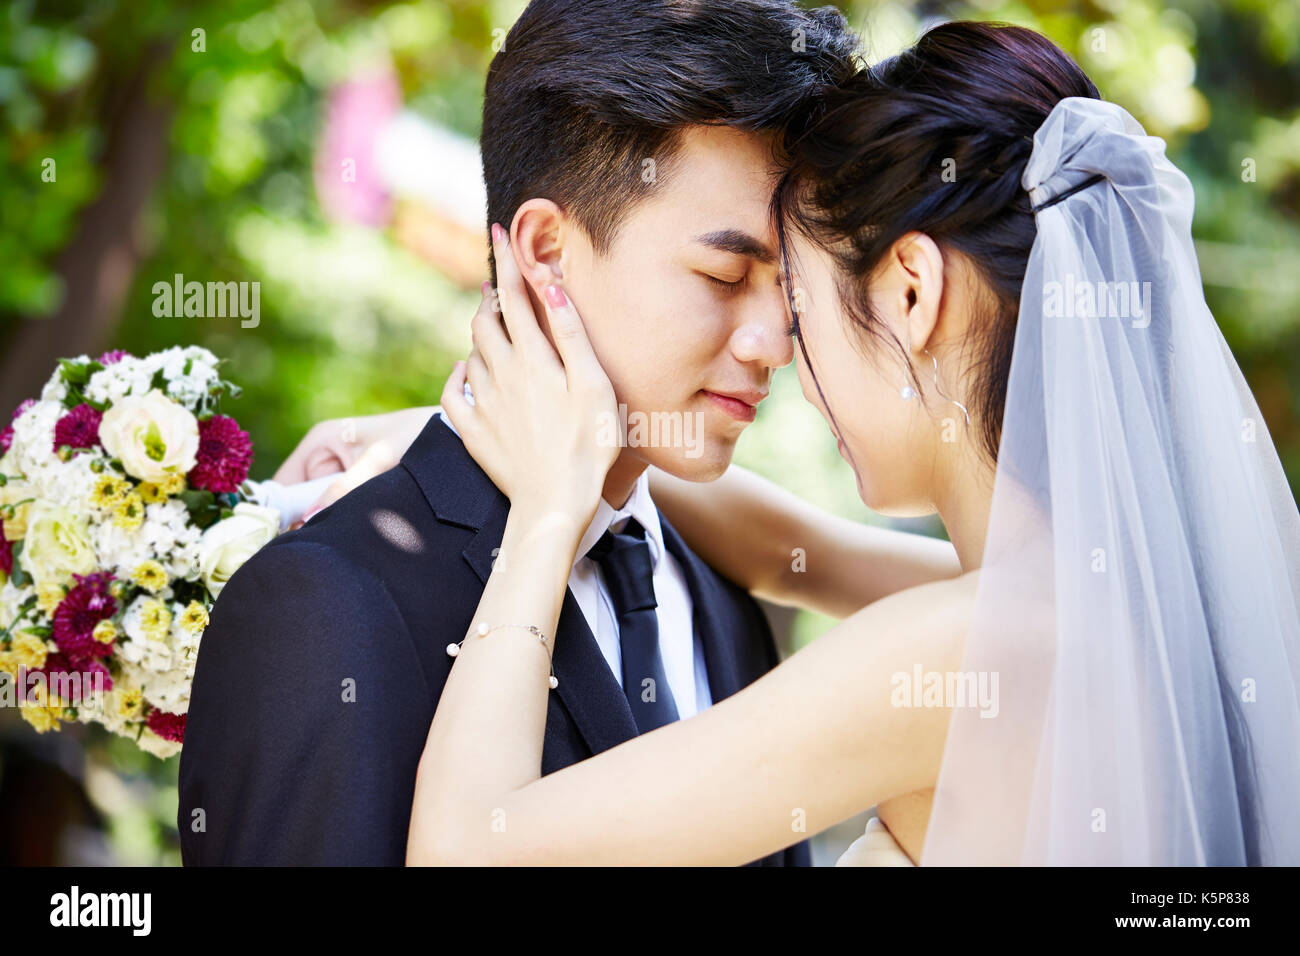 young asian bride and groom kissing at wedding ceremony Stock Photo